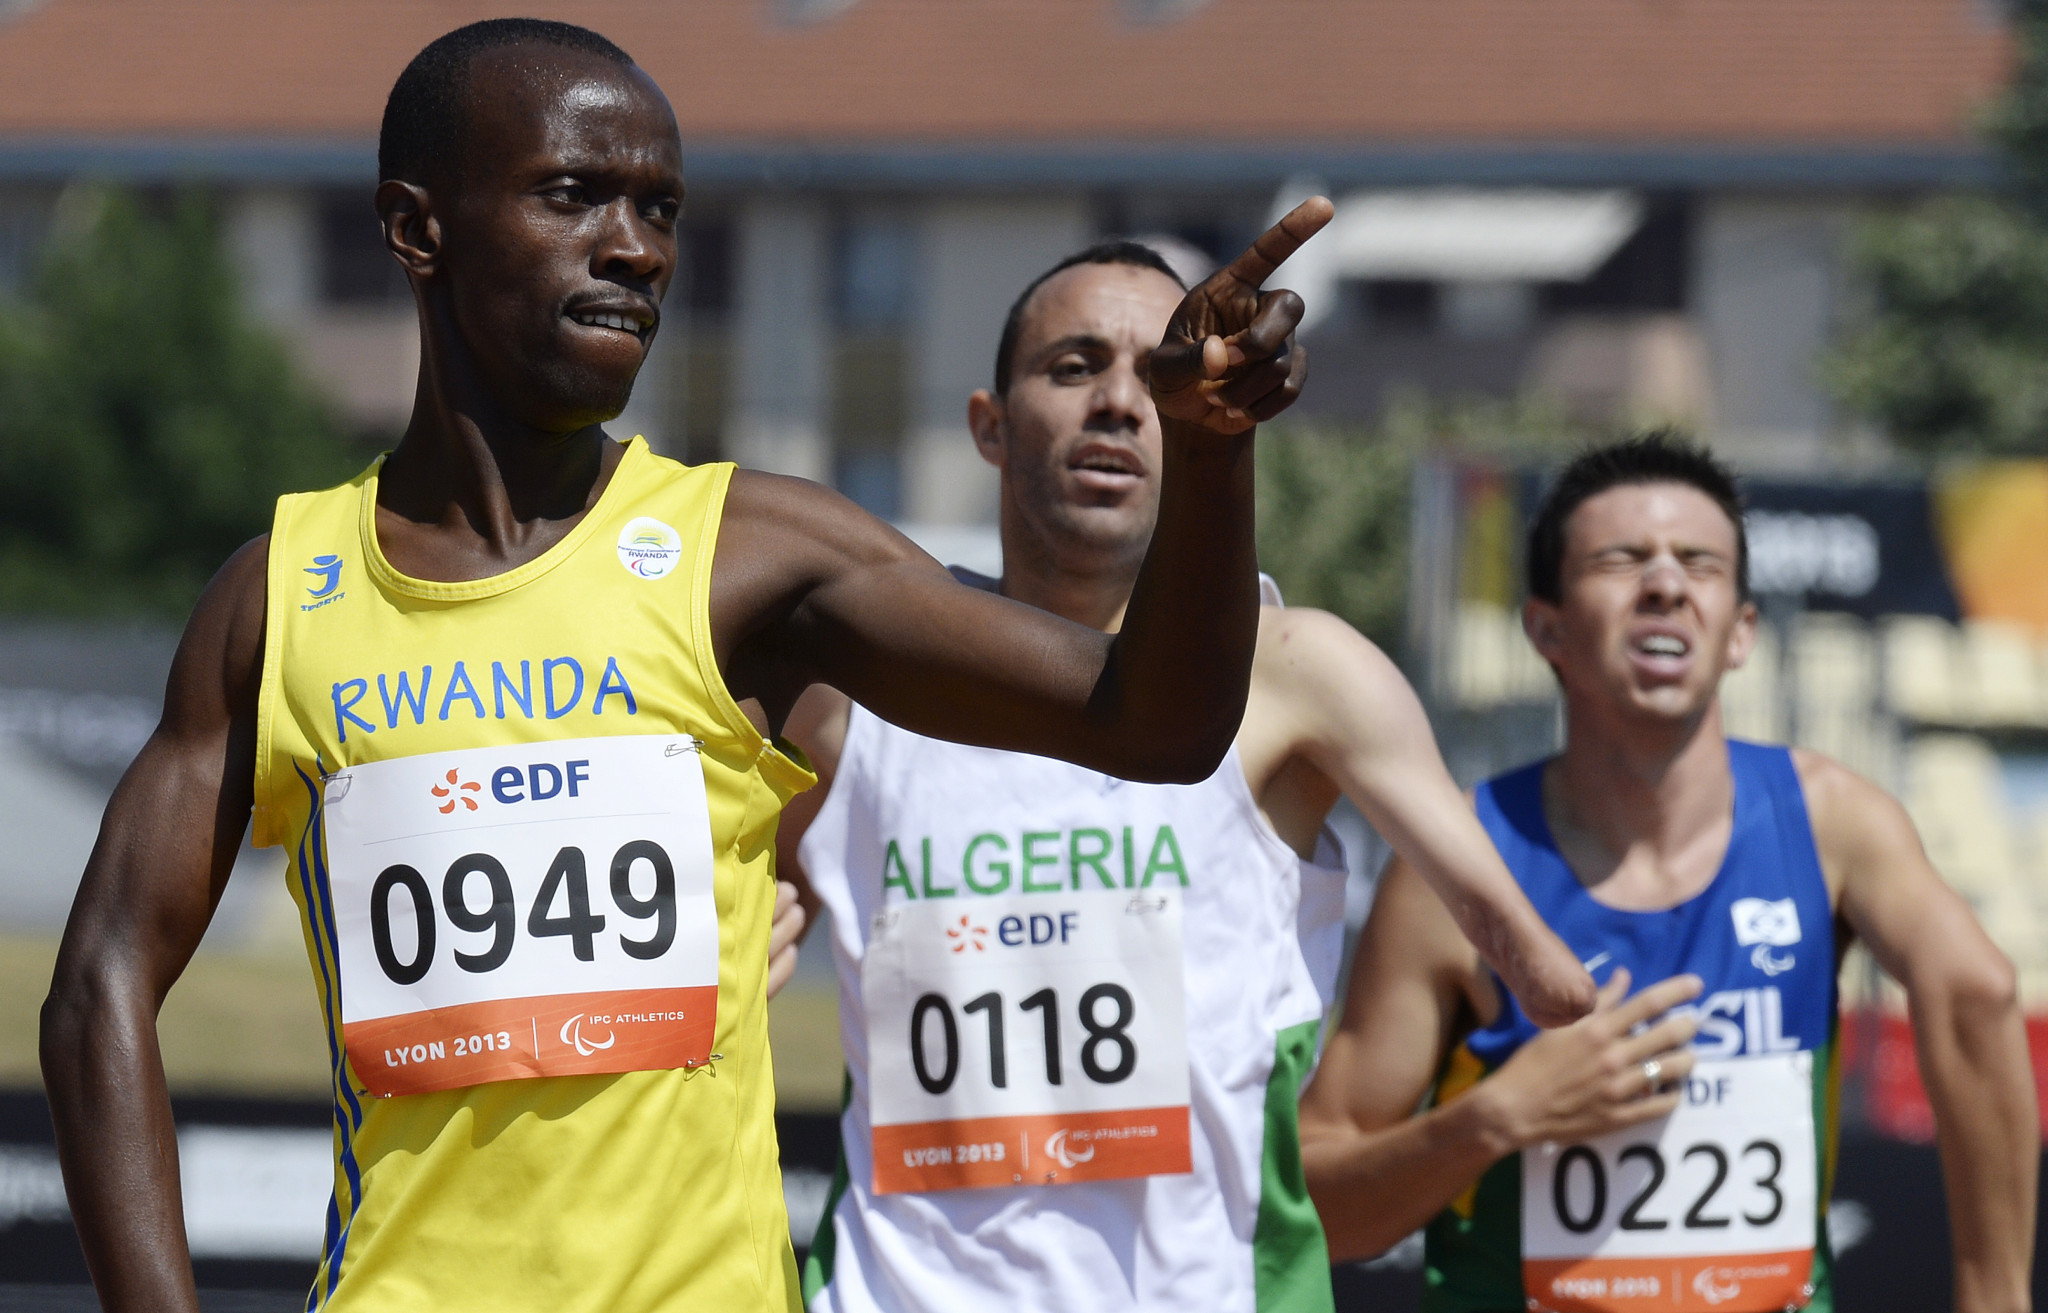 Rwanda lift ban of athlete suspended for criticising running of Paralympic sport